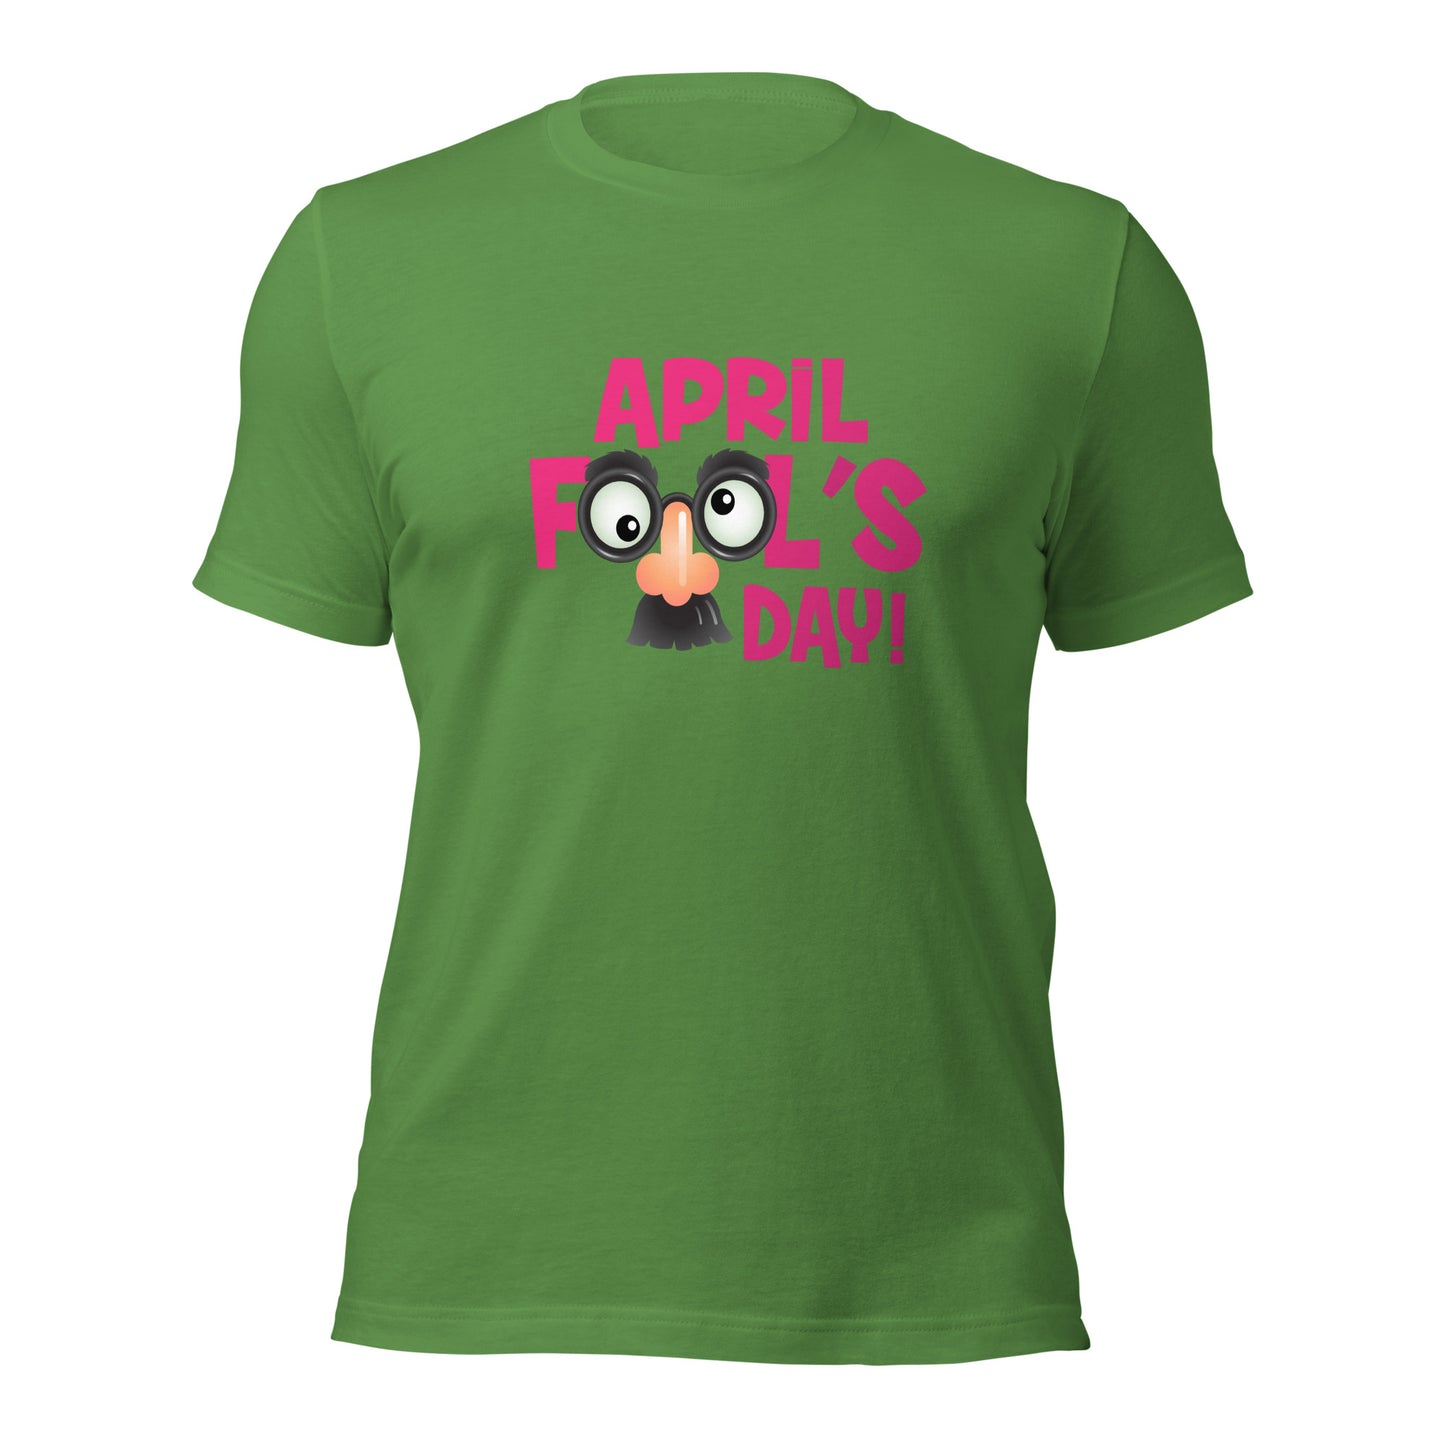 "April Fools Day" Goofy T-Shirt - Weave Got Gifts - Unique Gifts You Won’t Find Anywhere Else!